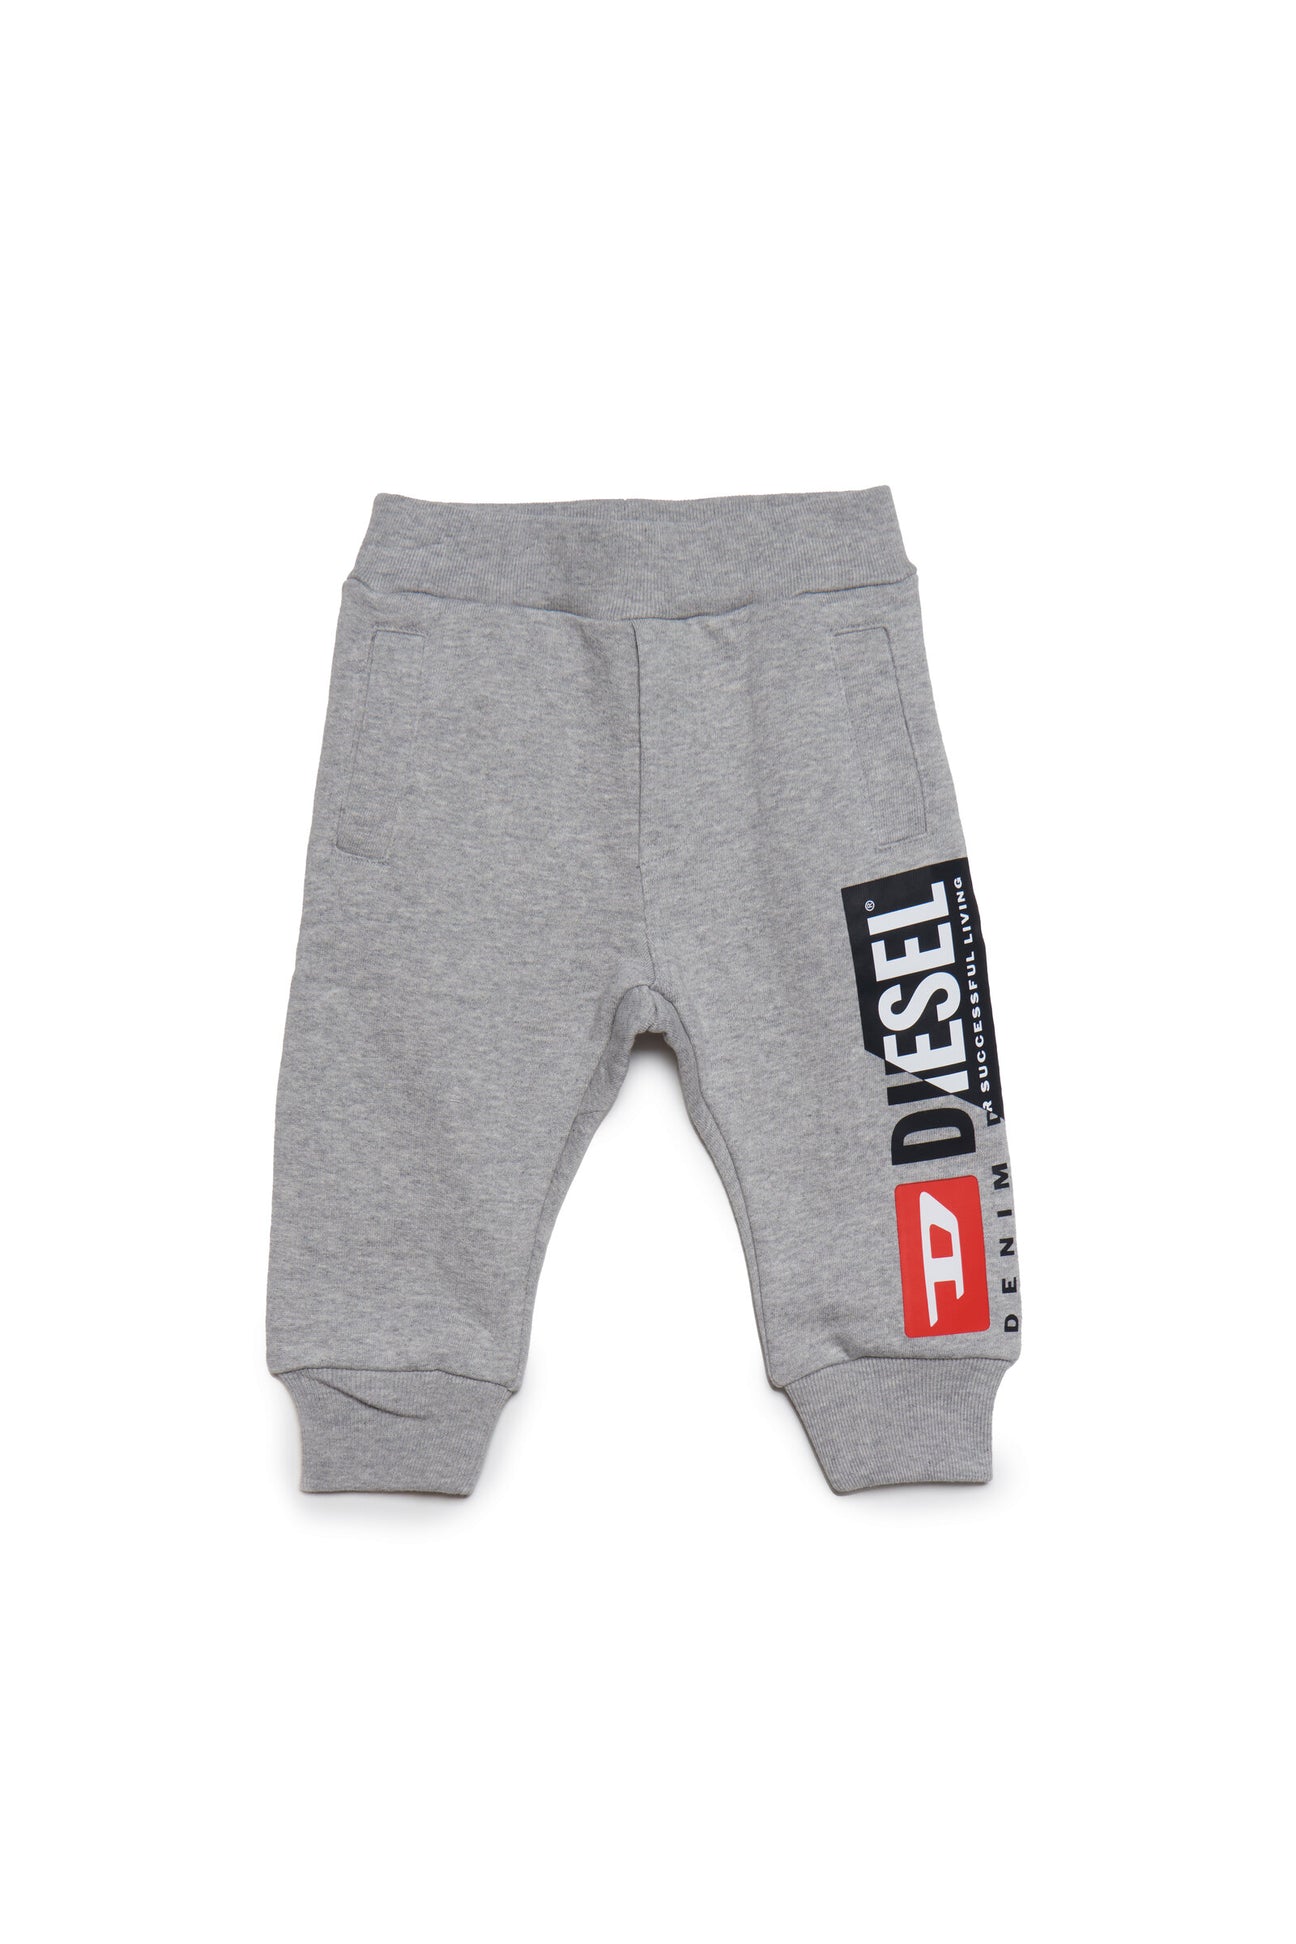 Gray jogger pants with Diesel double logo and back pocket 